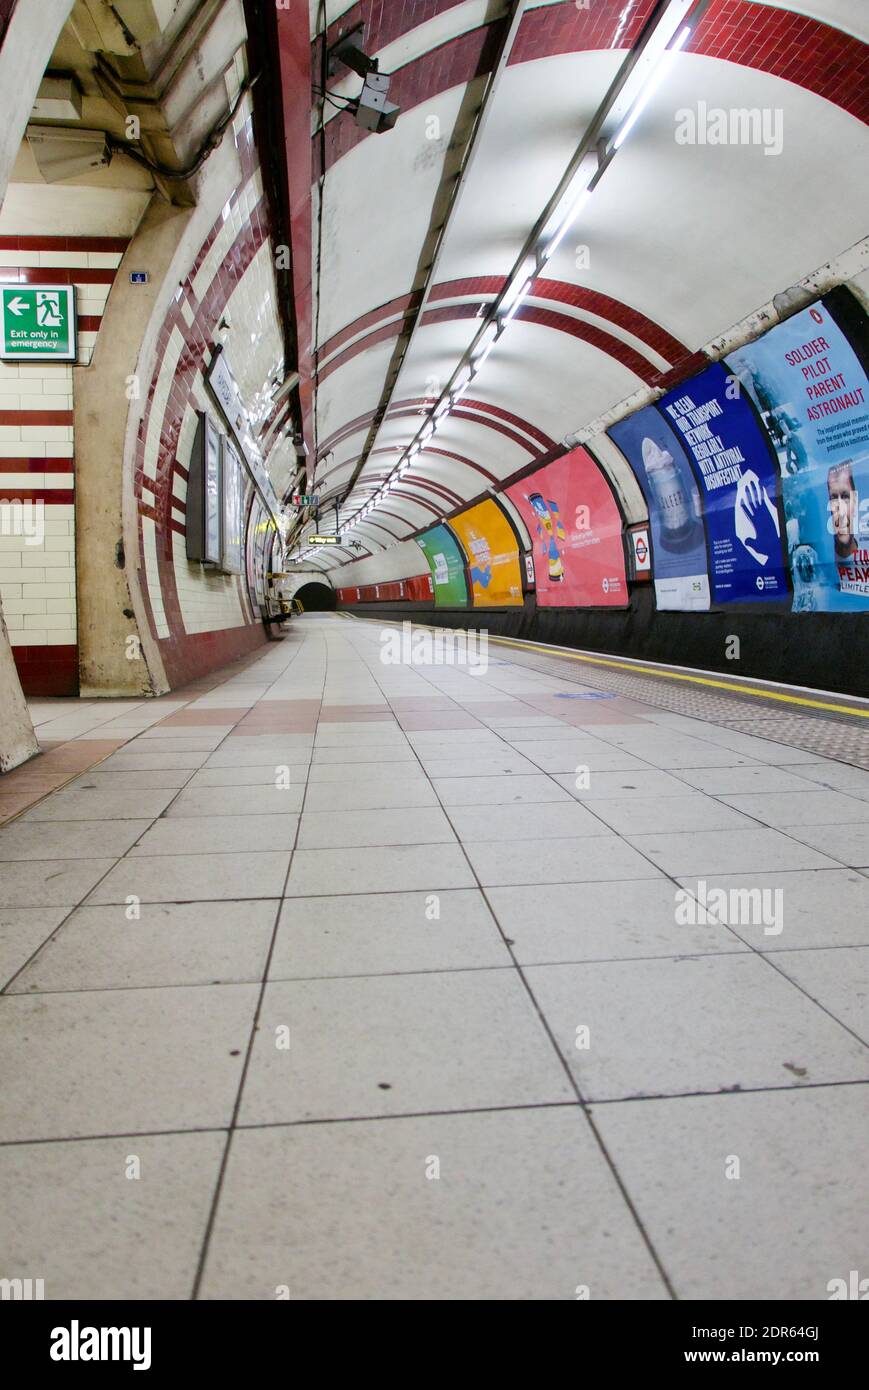 First day of Tier 4 covid19 restrictions. Government order people to stay at home. Hampstead tube station platform is empty with no passengers. London. Stock Photo